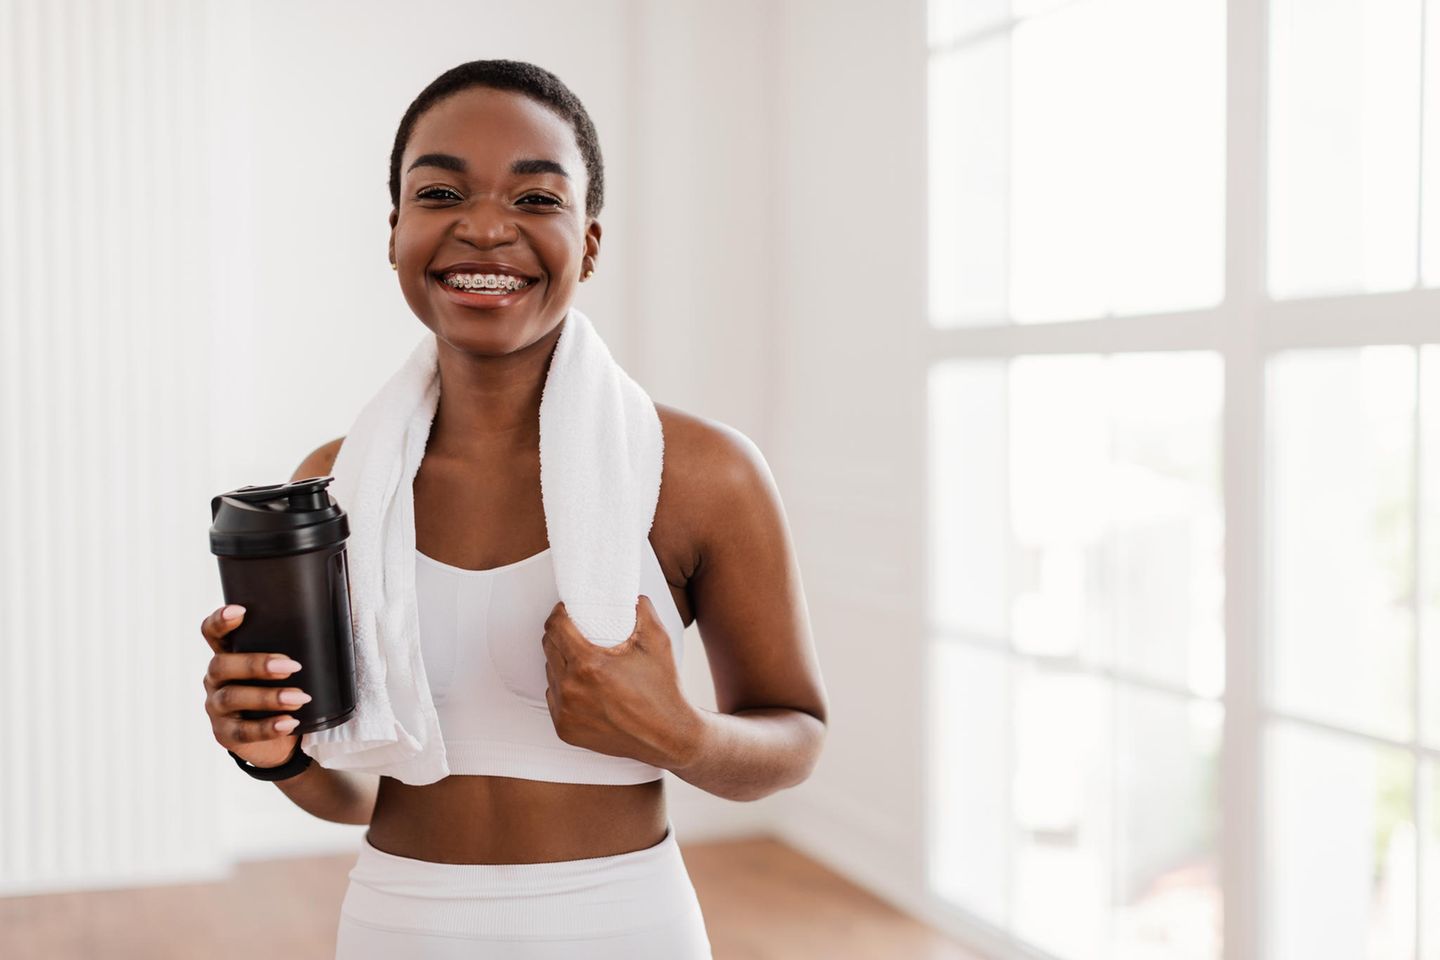 Woman drinks coffee after exercising: these are the 4 best foods for sore muscles